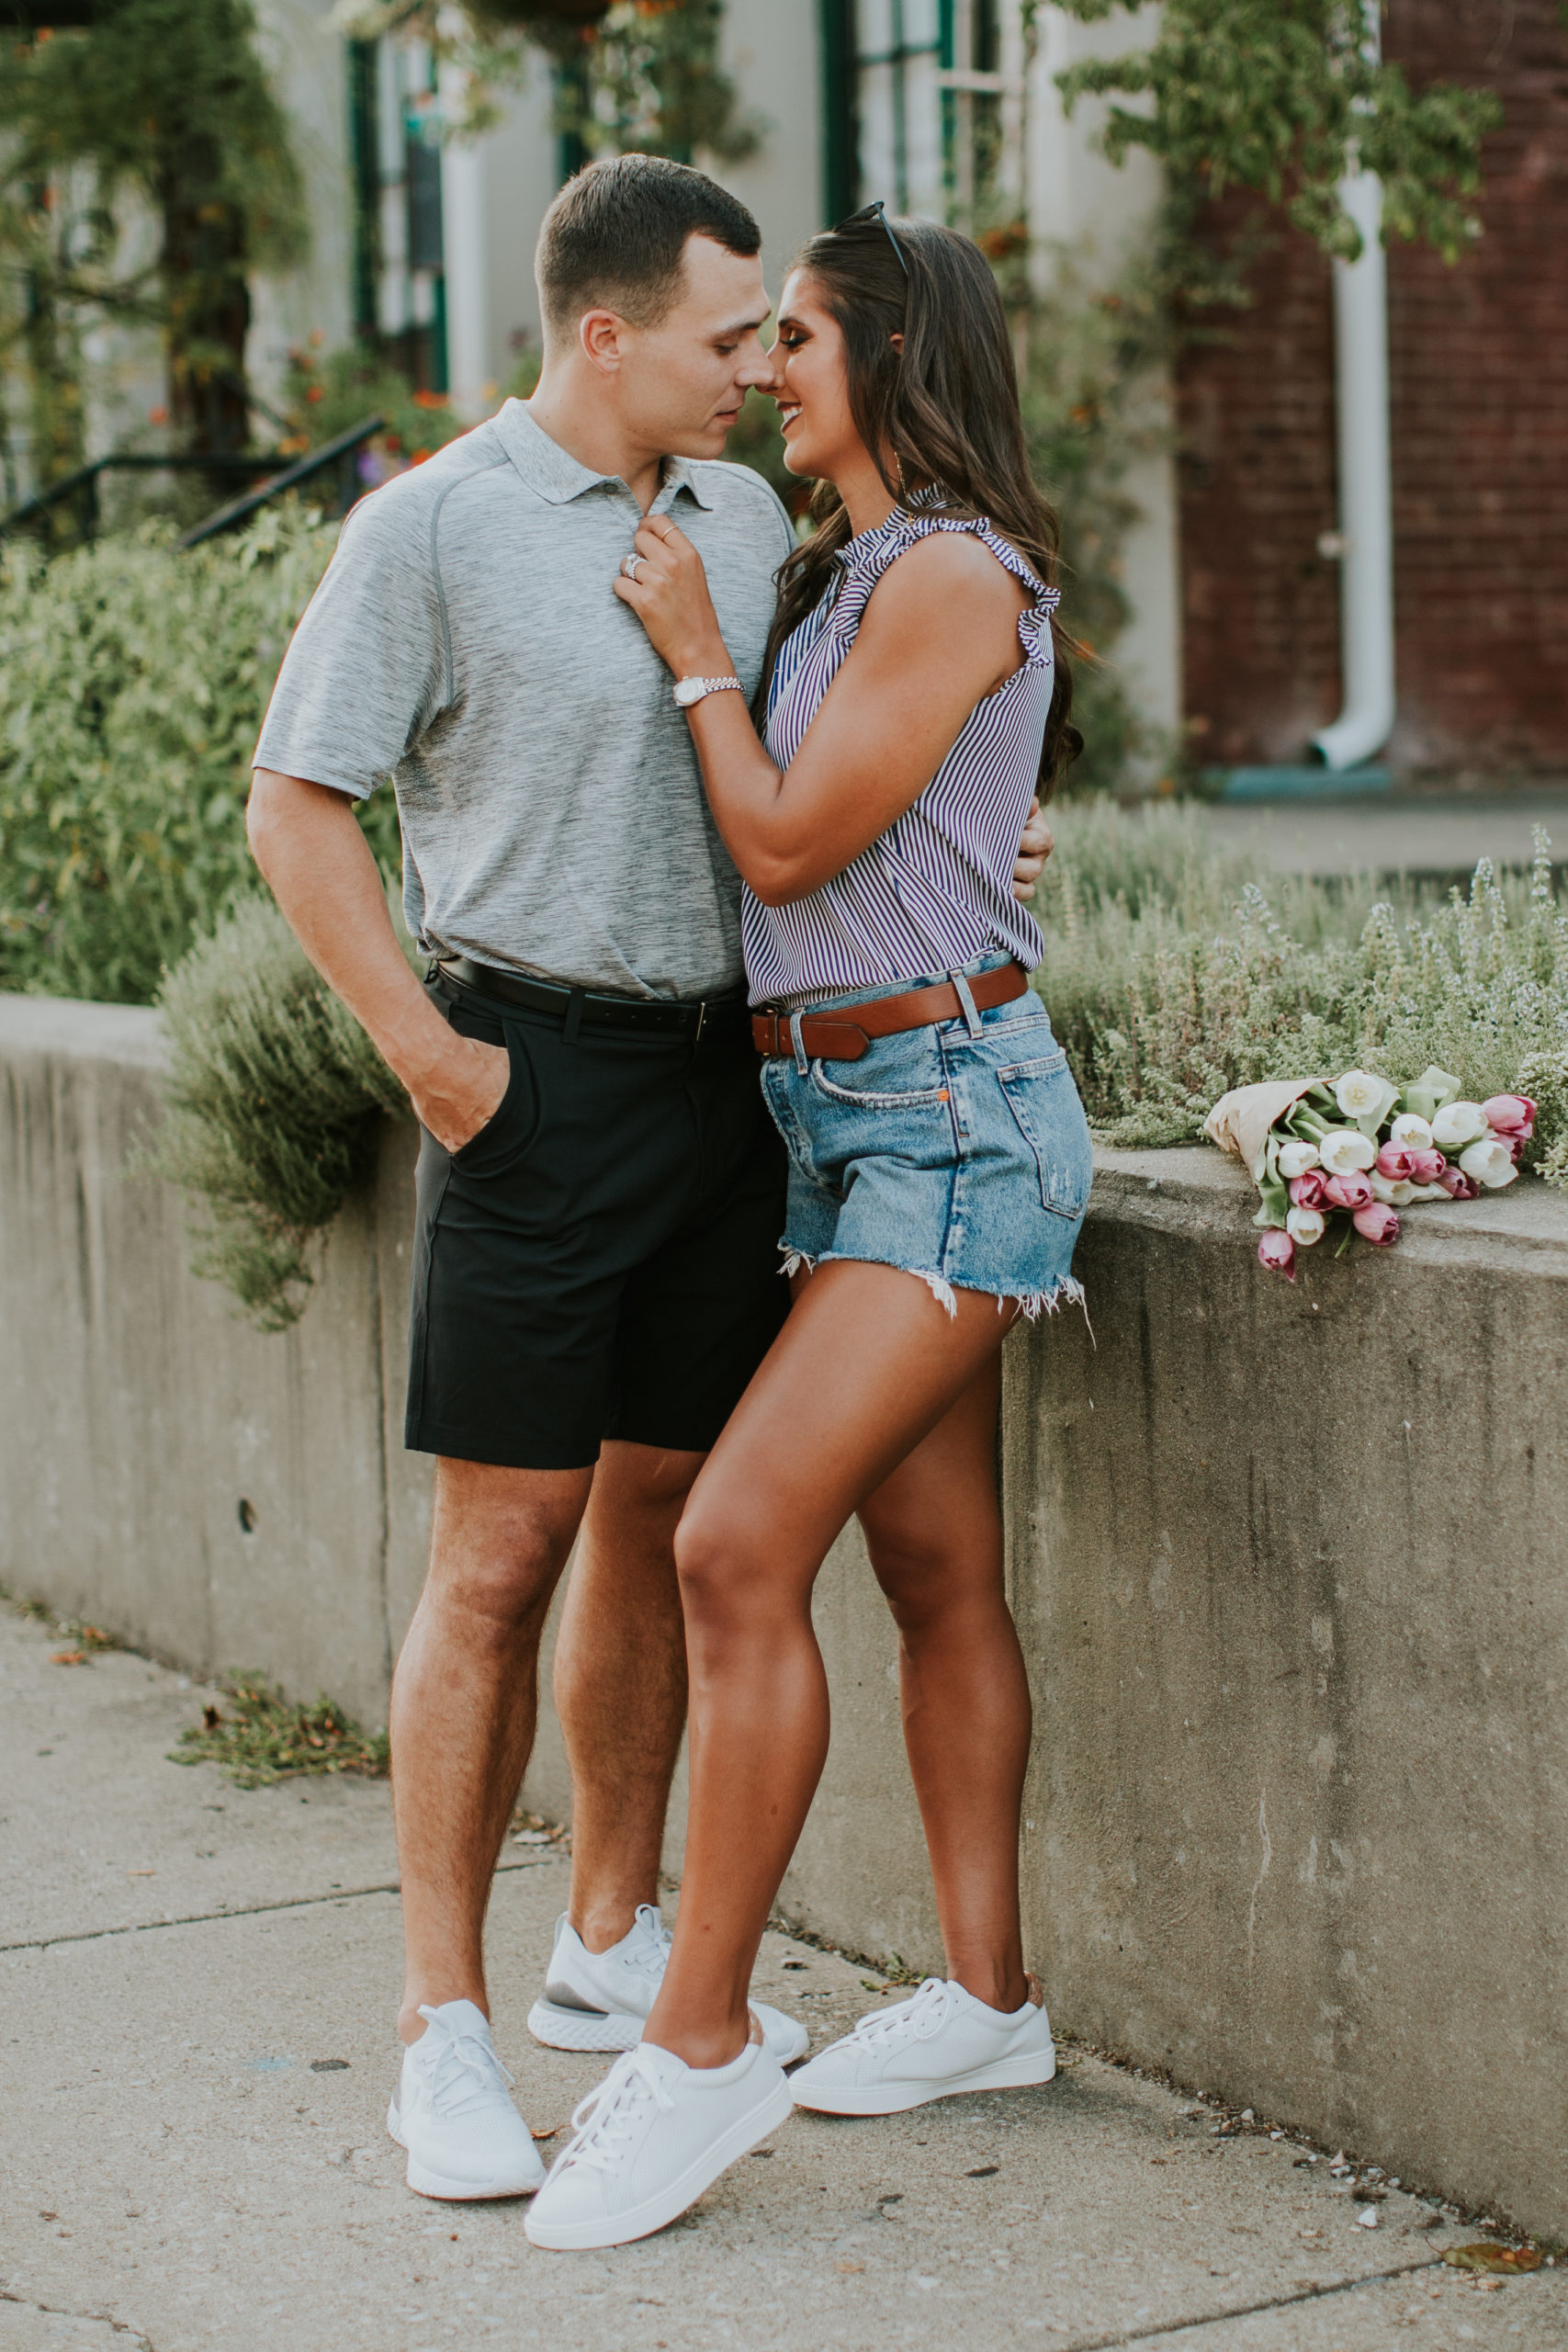 favorite adult board games, favorite board games, spring style, couples style, men's style, golf shirt, peter millar, ruffle top, jordan white louisville // grace white a southern drawl